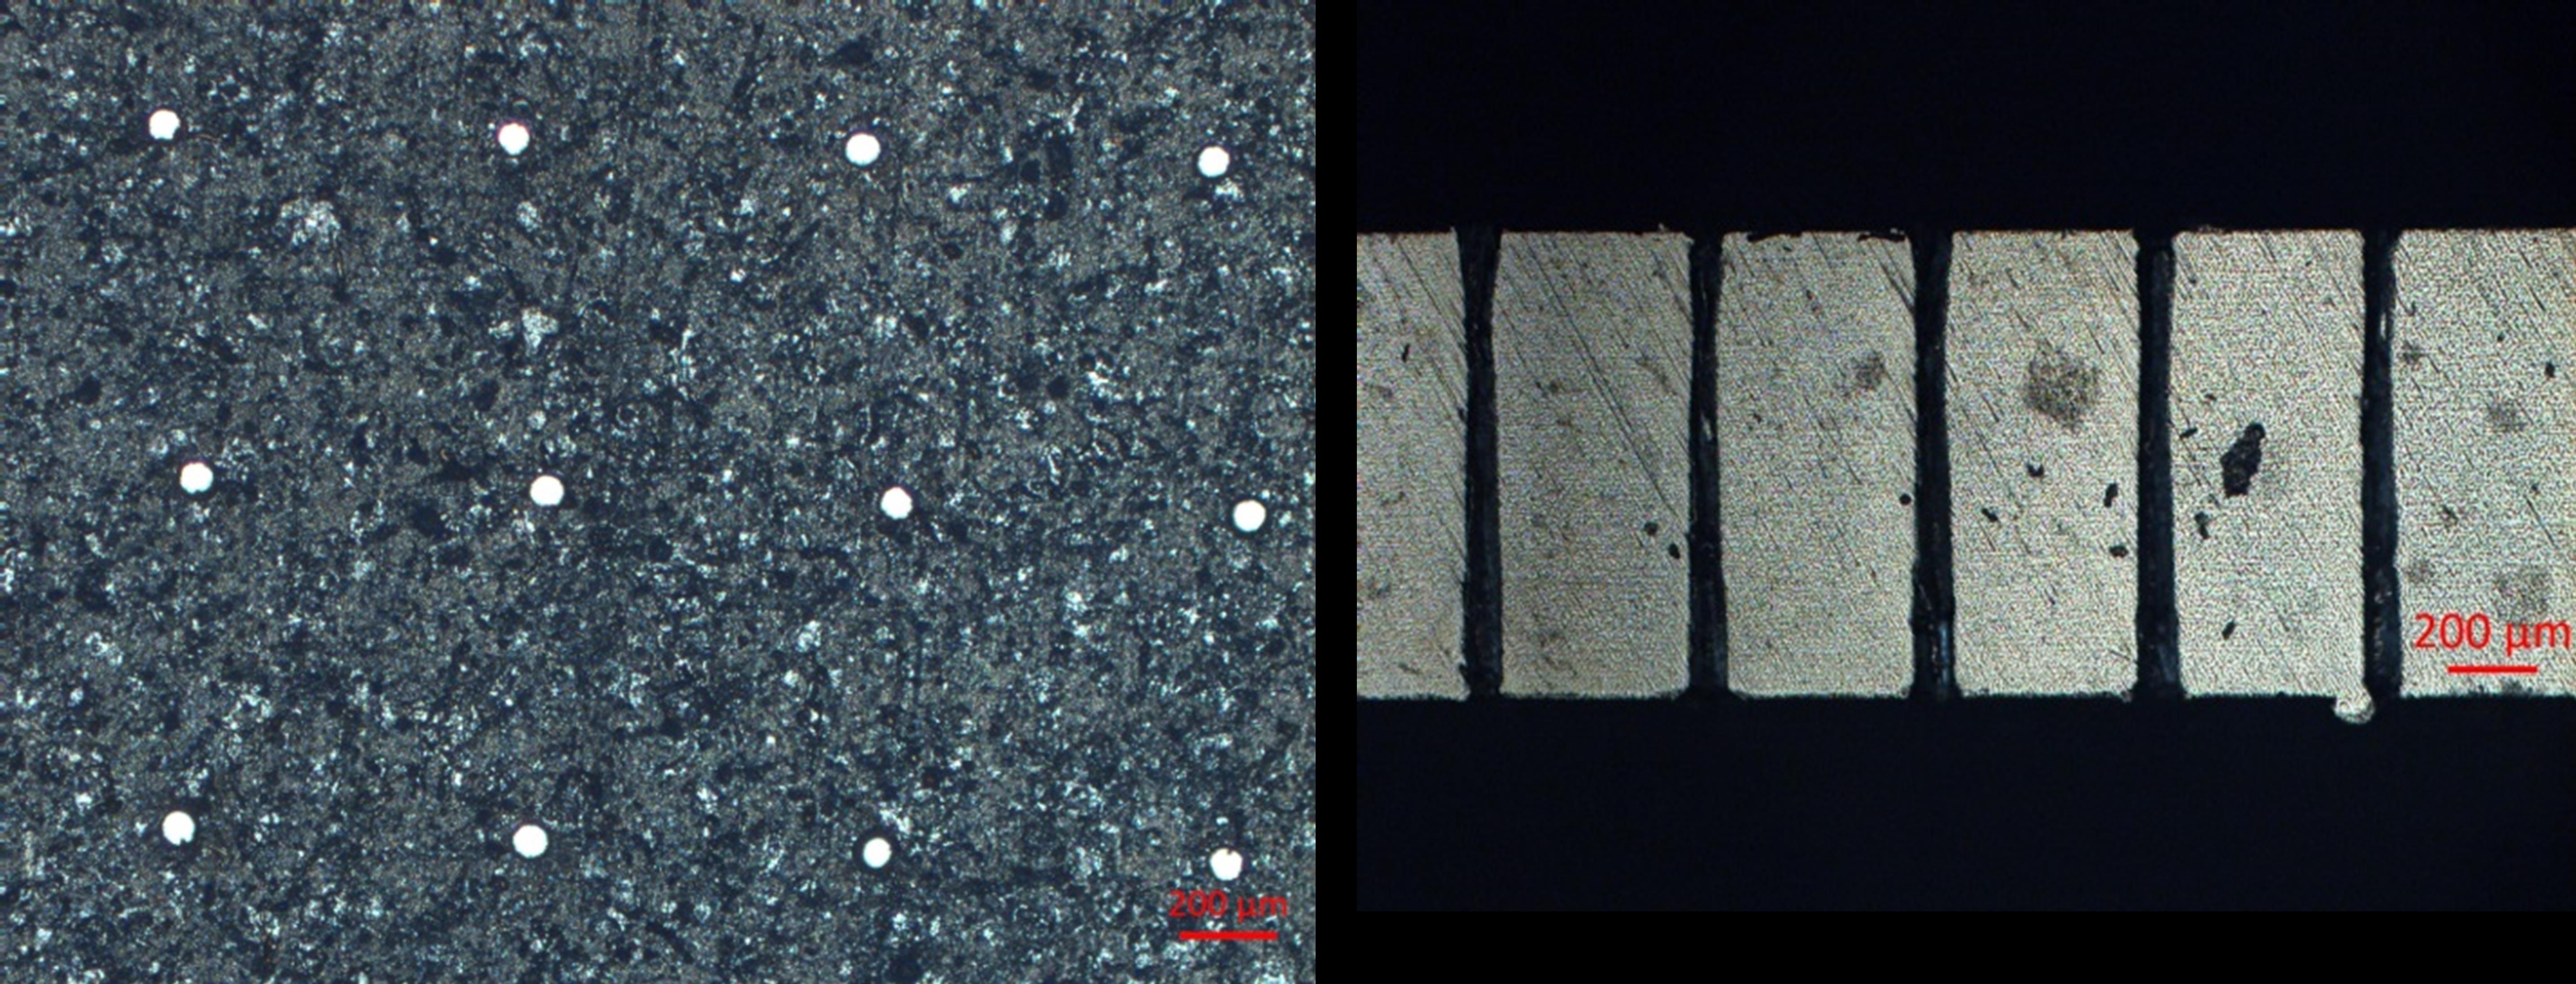 View of the micro bores with transmitted light (left) and longitudinal section of the bores (right).